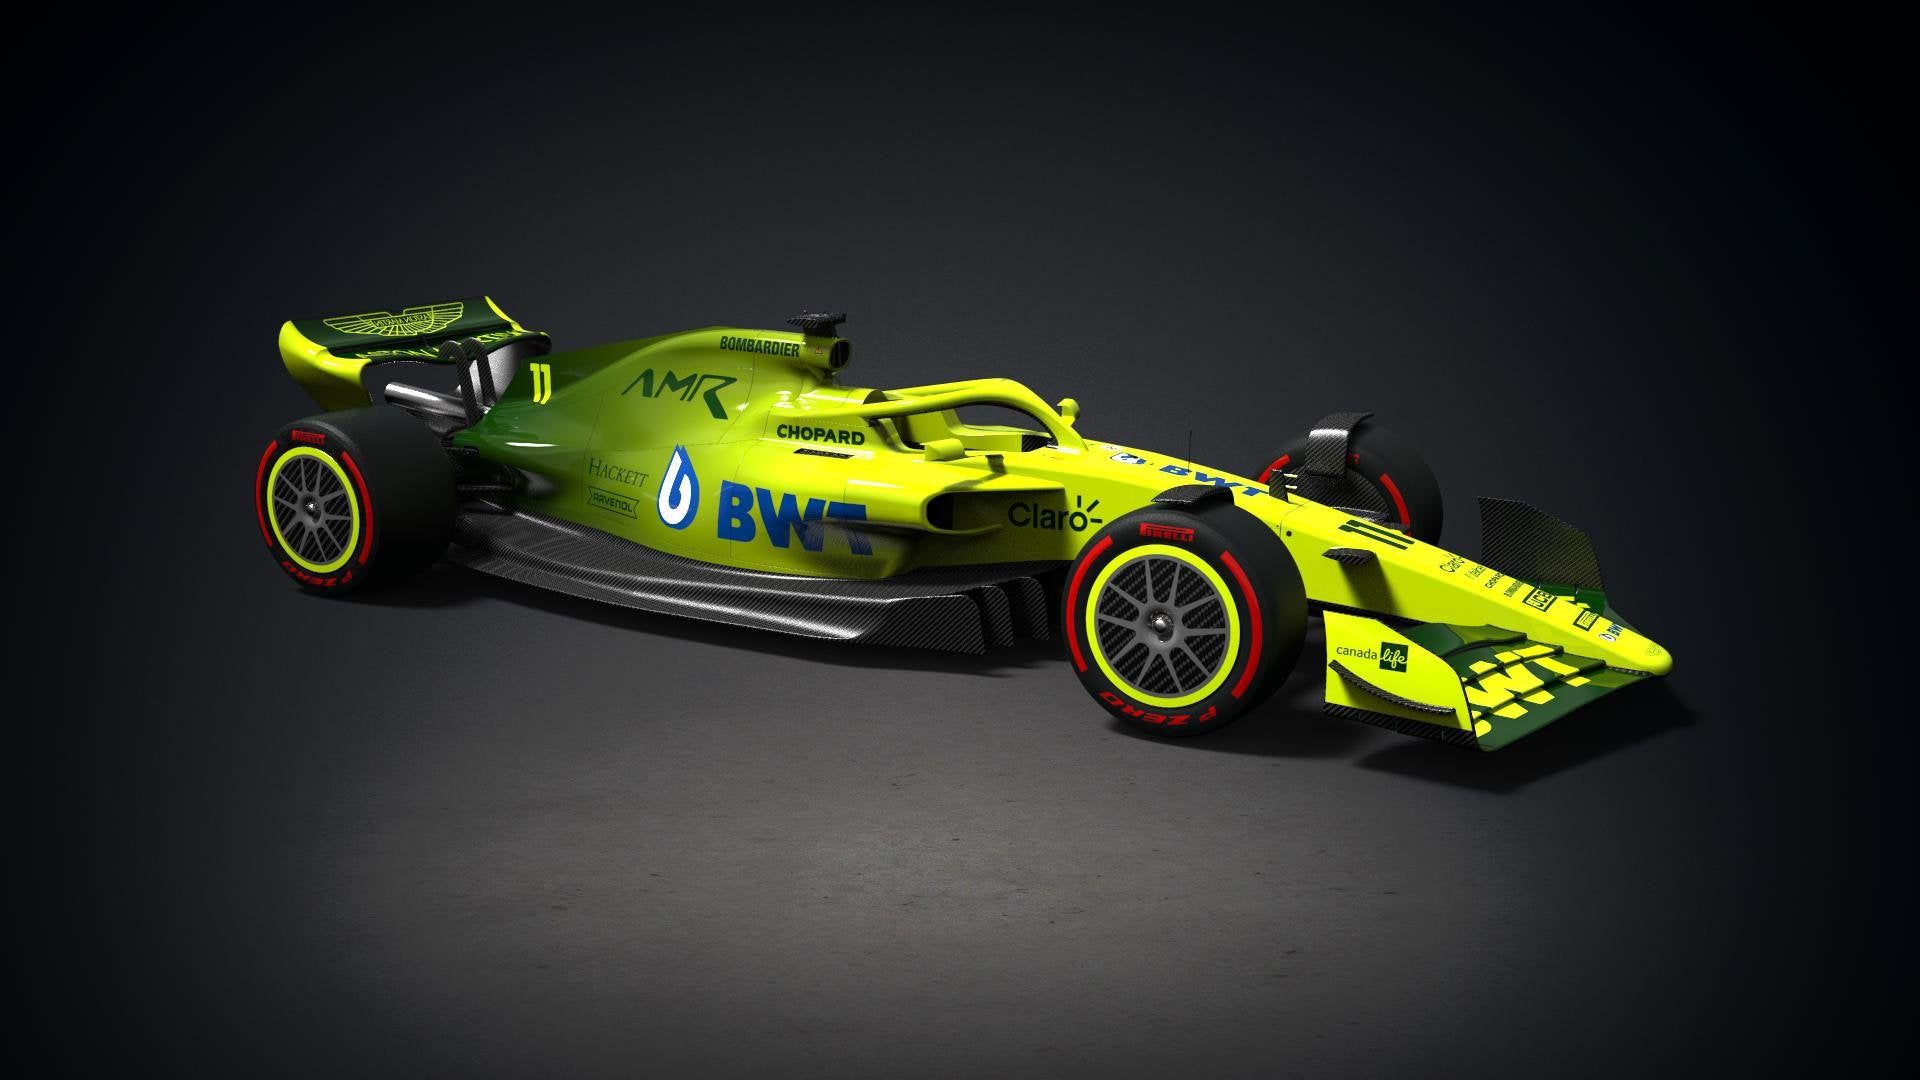 I've Created A Concept Aston Martin Livery For My Self Designed 2021 F1 Car